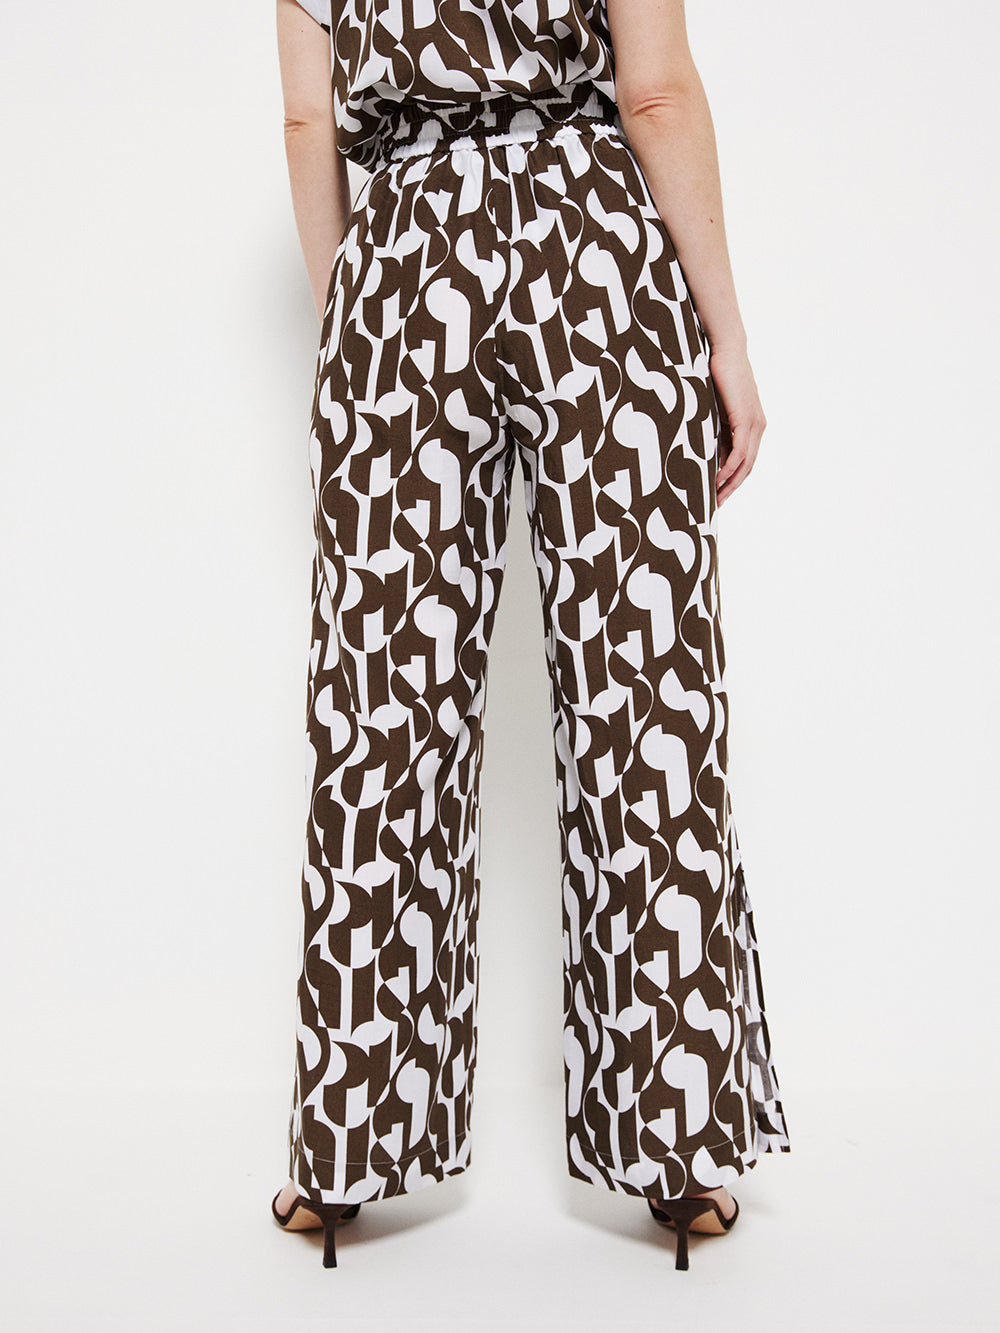 The Graphic Print Pant